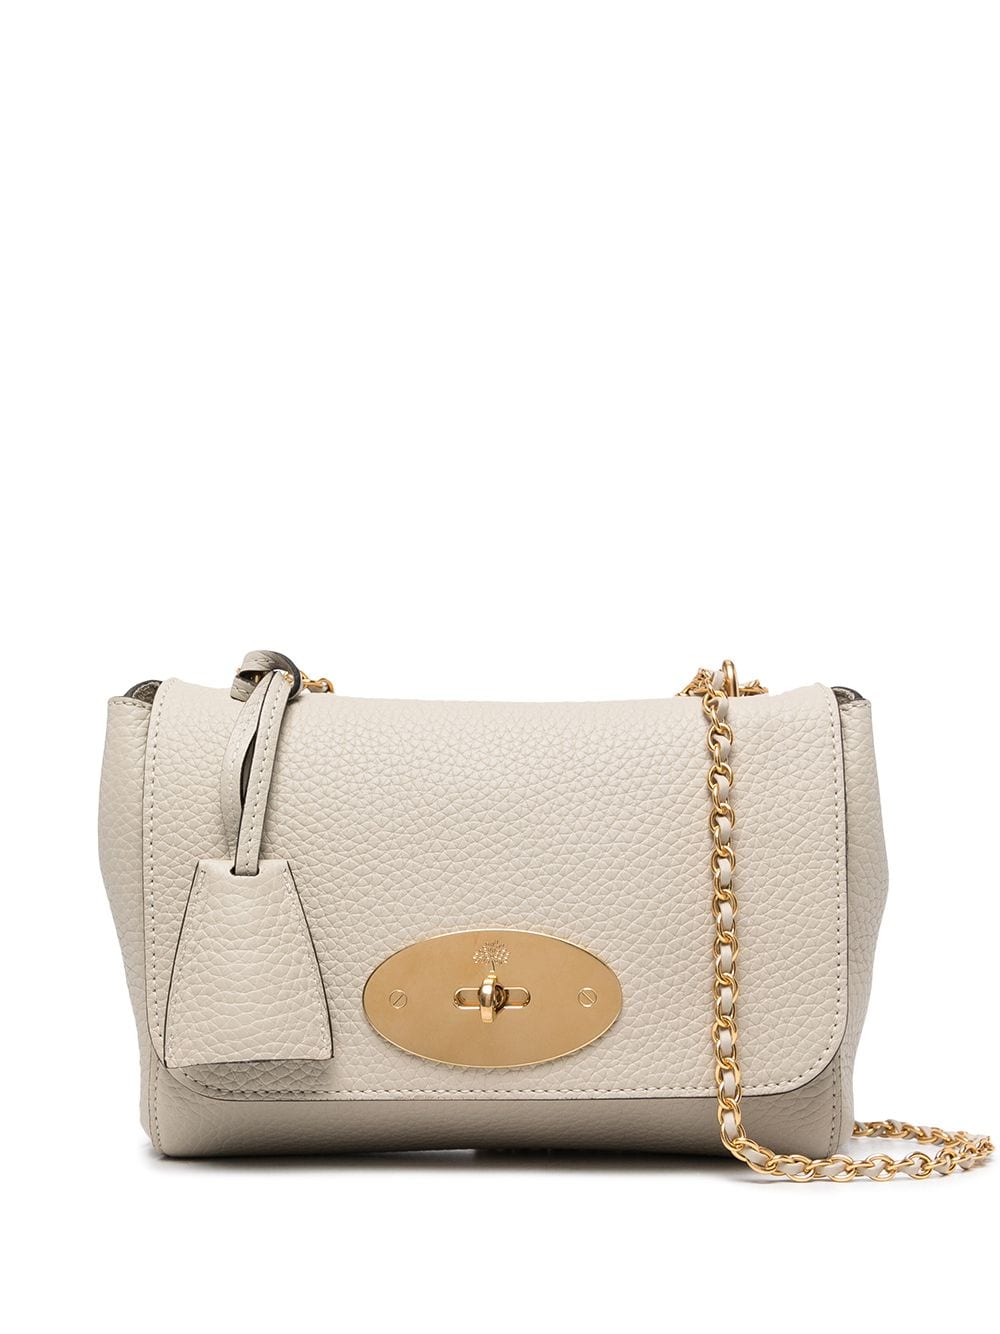 Image 1 of Mulberry Lily satchel bag